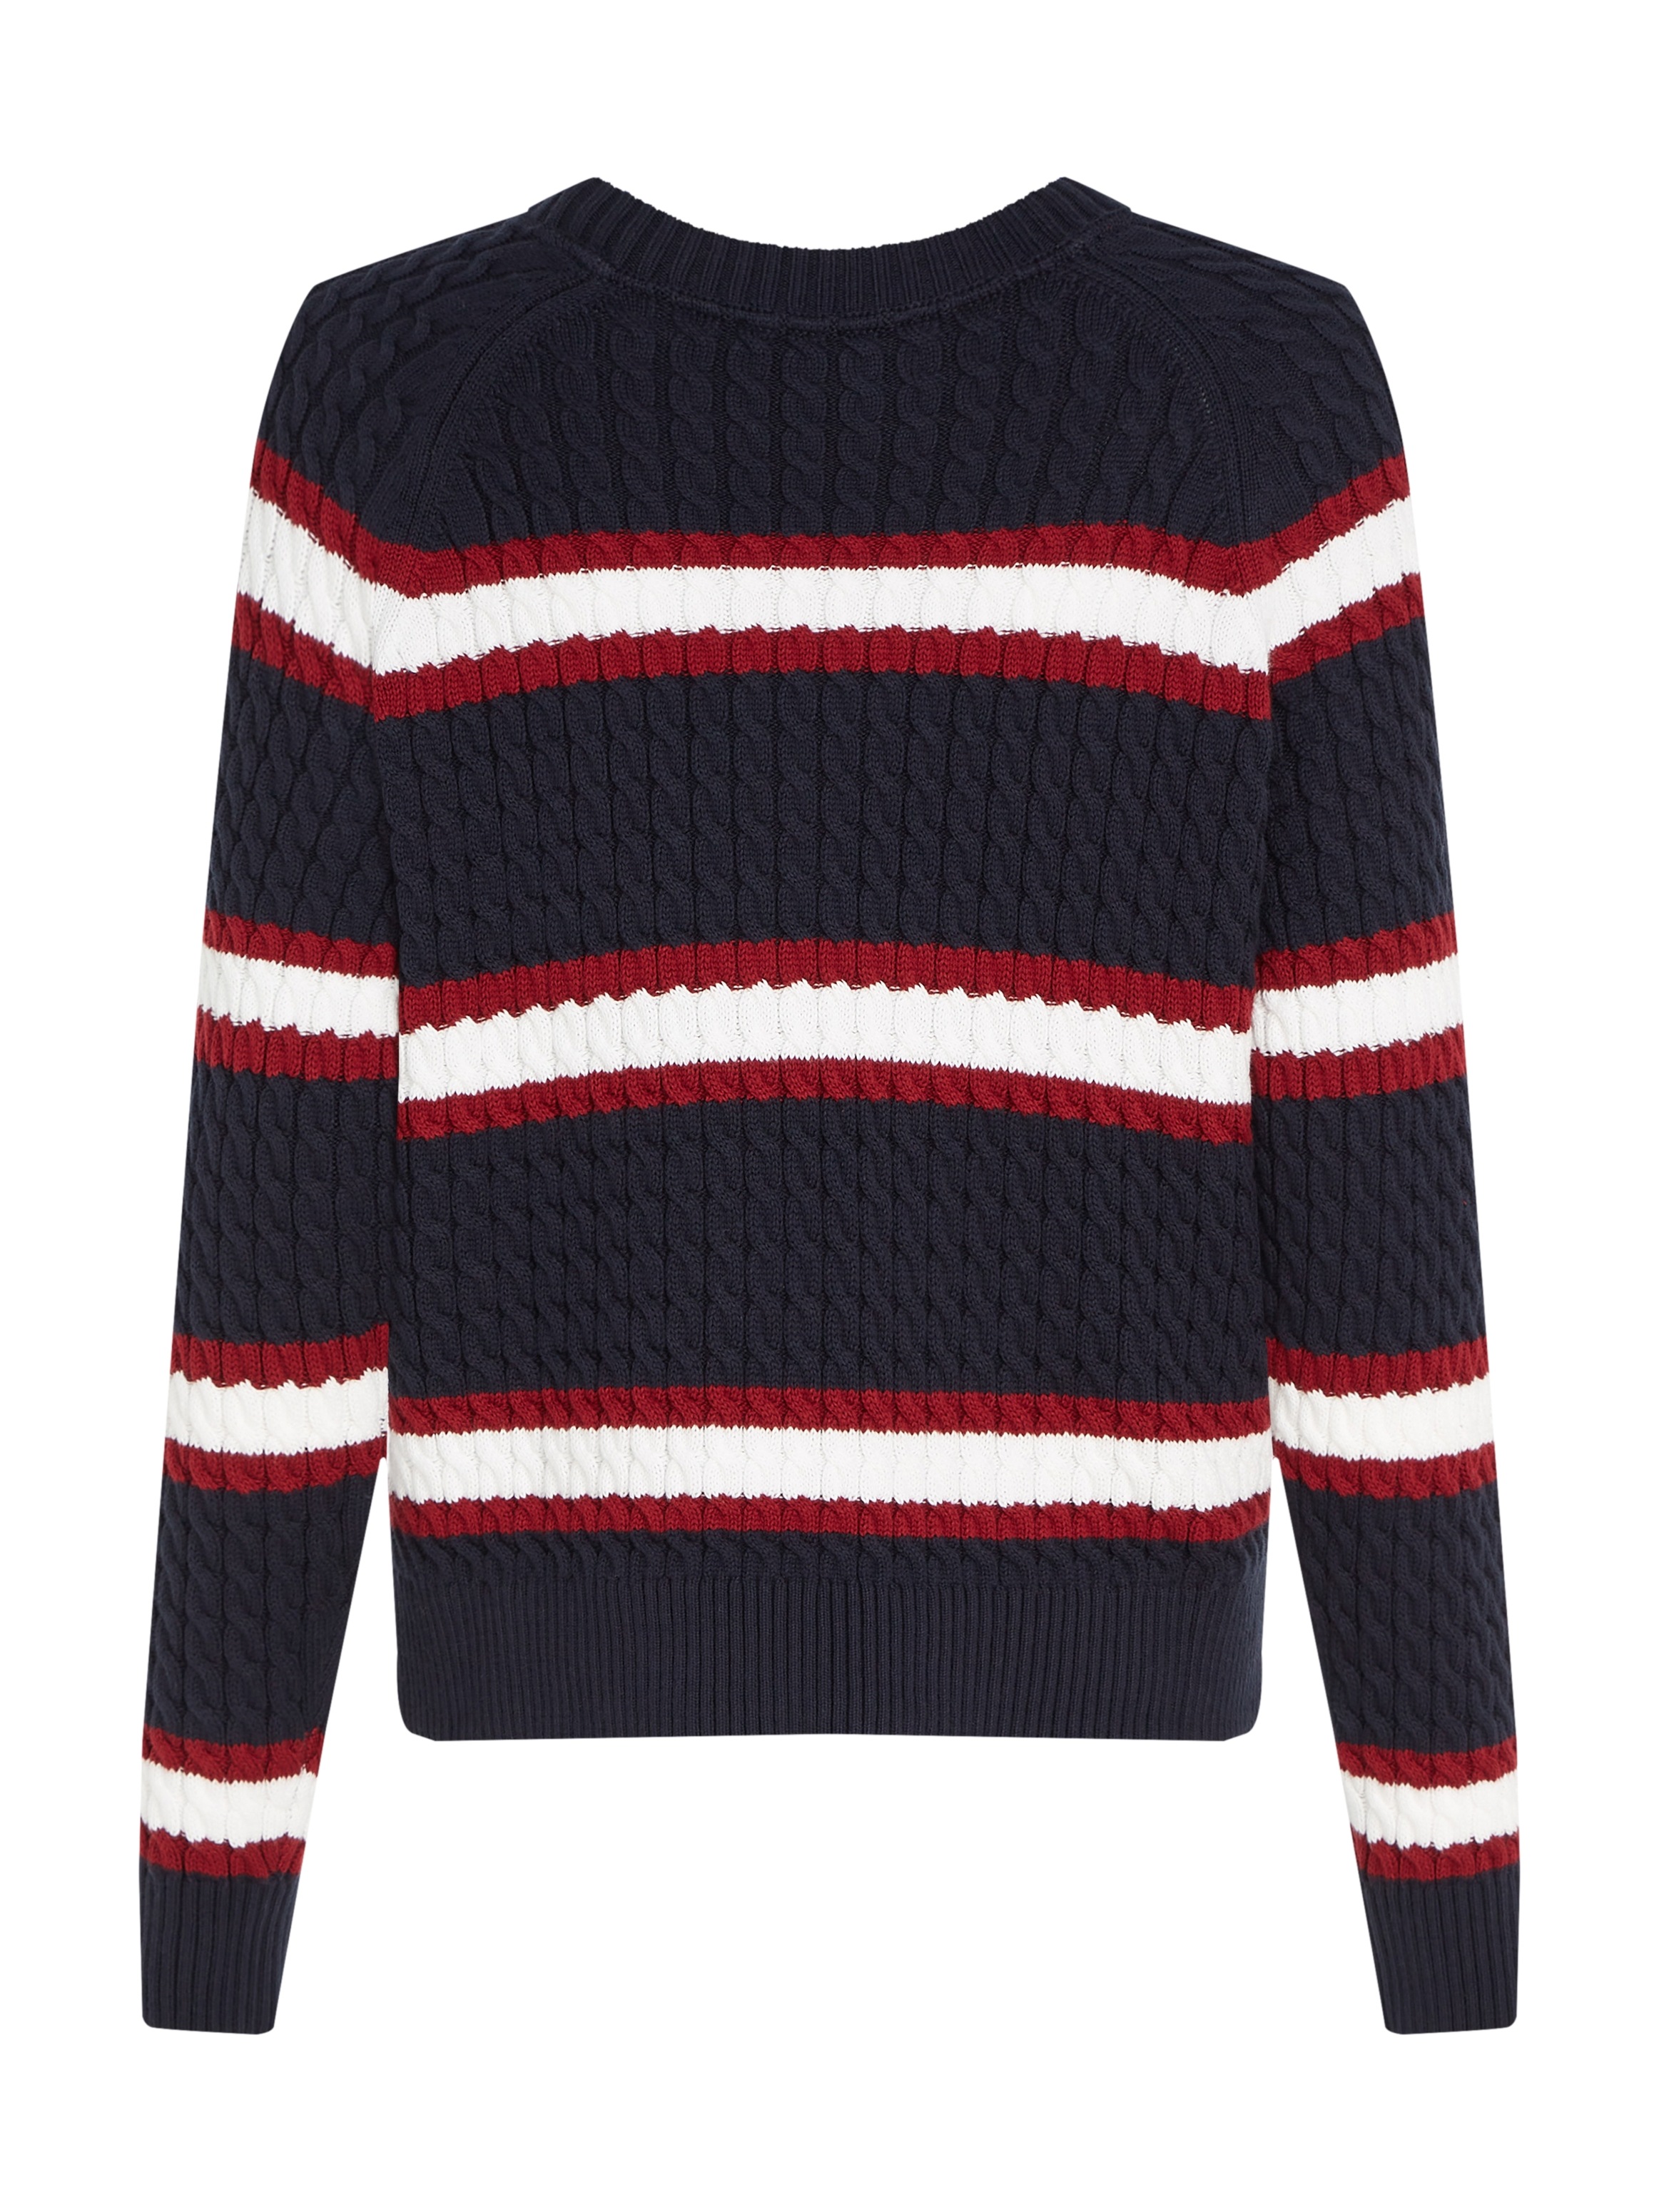 Hilfiger Logostickerei ♕ C-NECK Strickpullover »CO Tommy SWEATER«, bei mit CABLE MINI